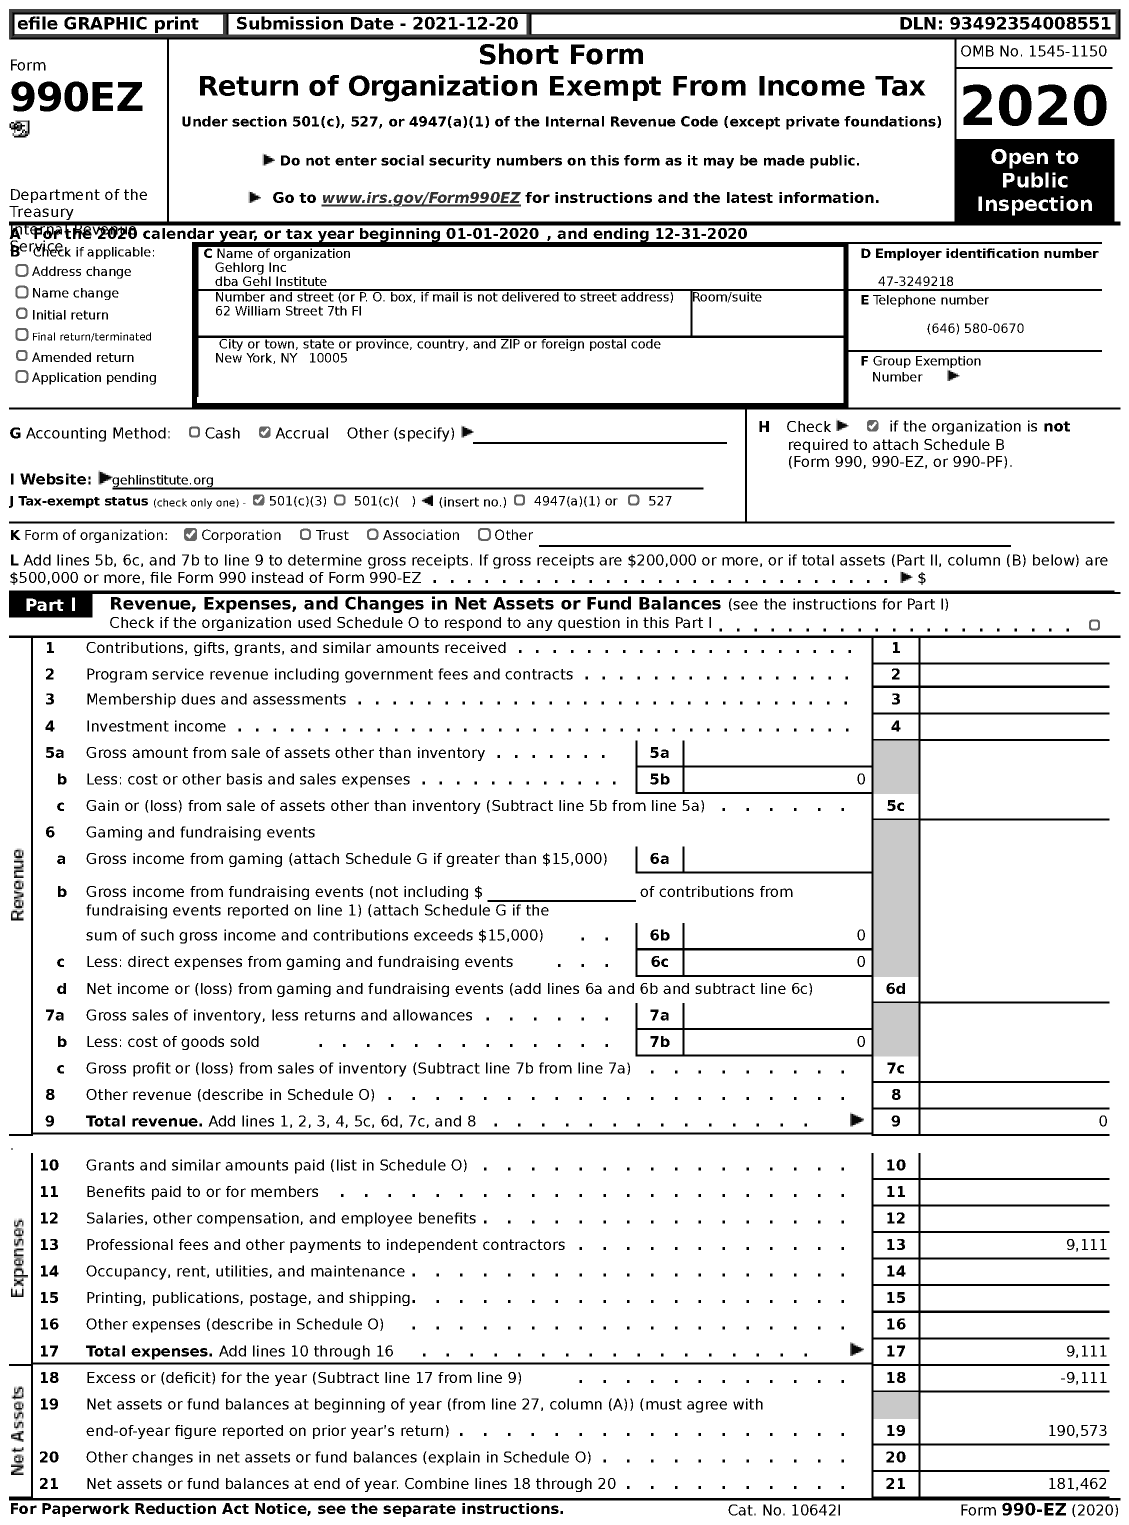 Image of first page of 2020 Form 990EZ for Gehl Org